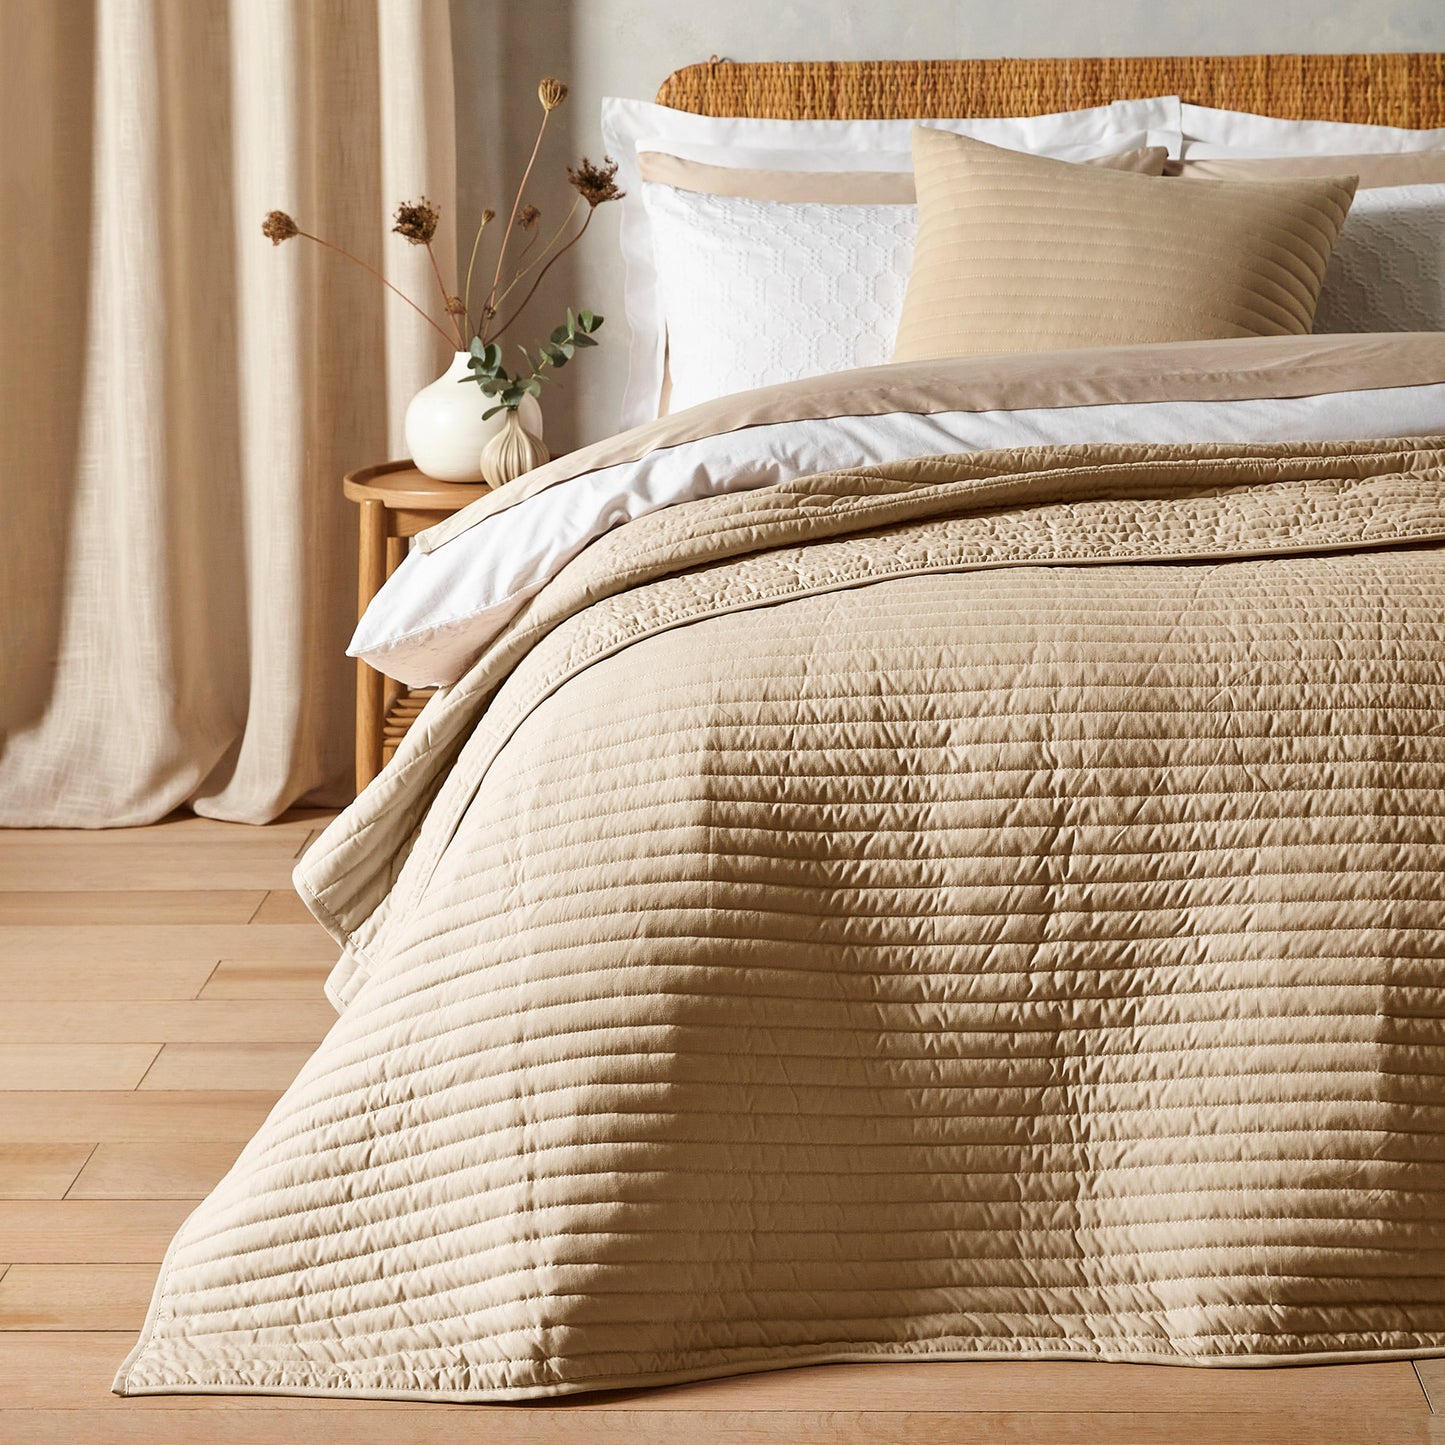 Bianca Natural Quilted Lines Bedspread (220cm x 230cm)